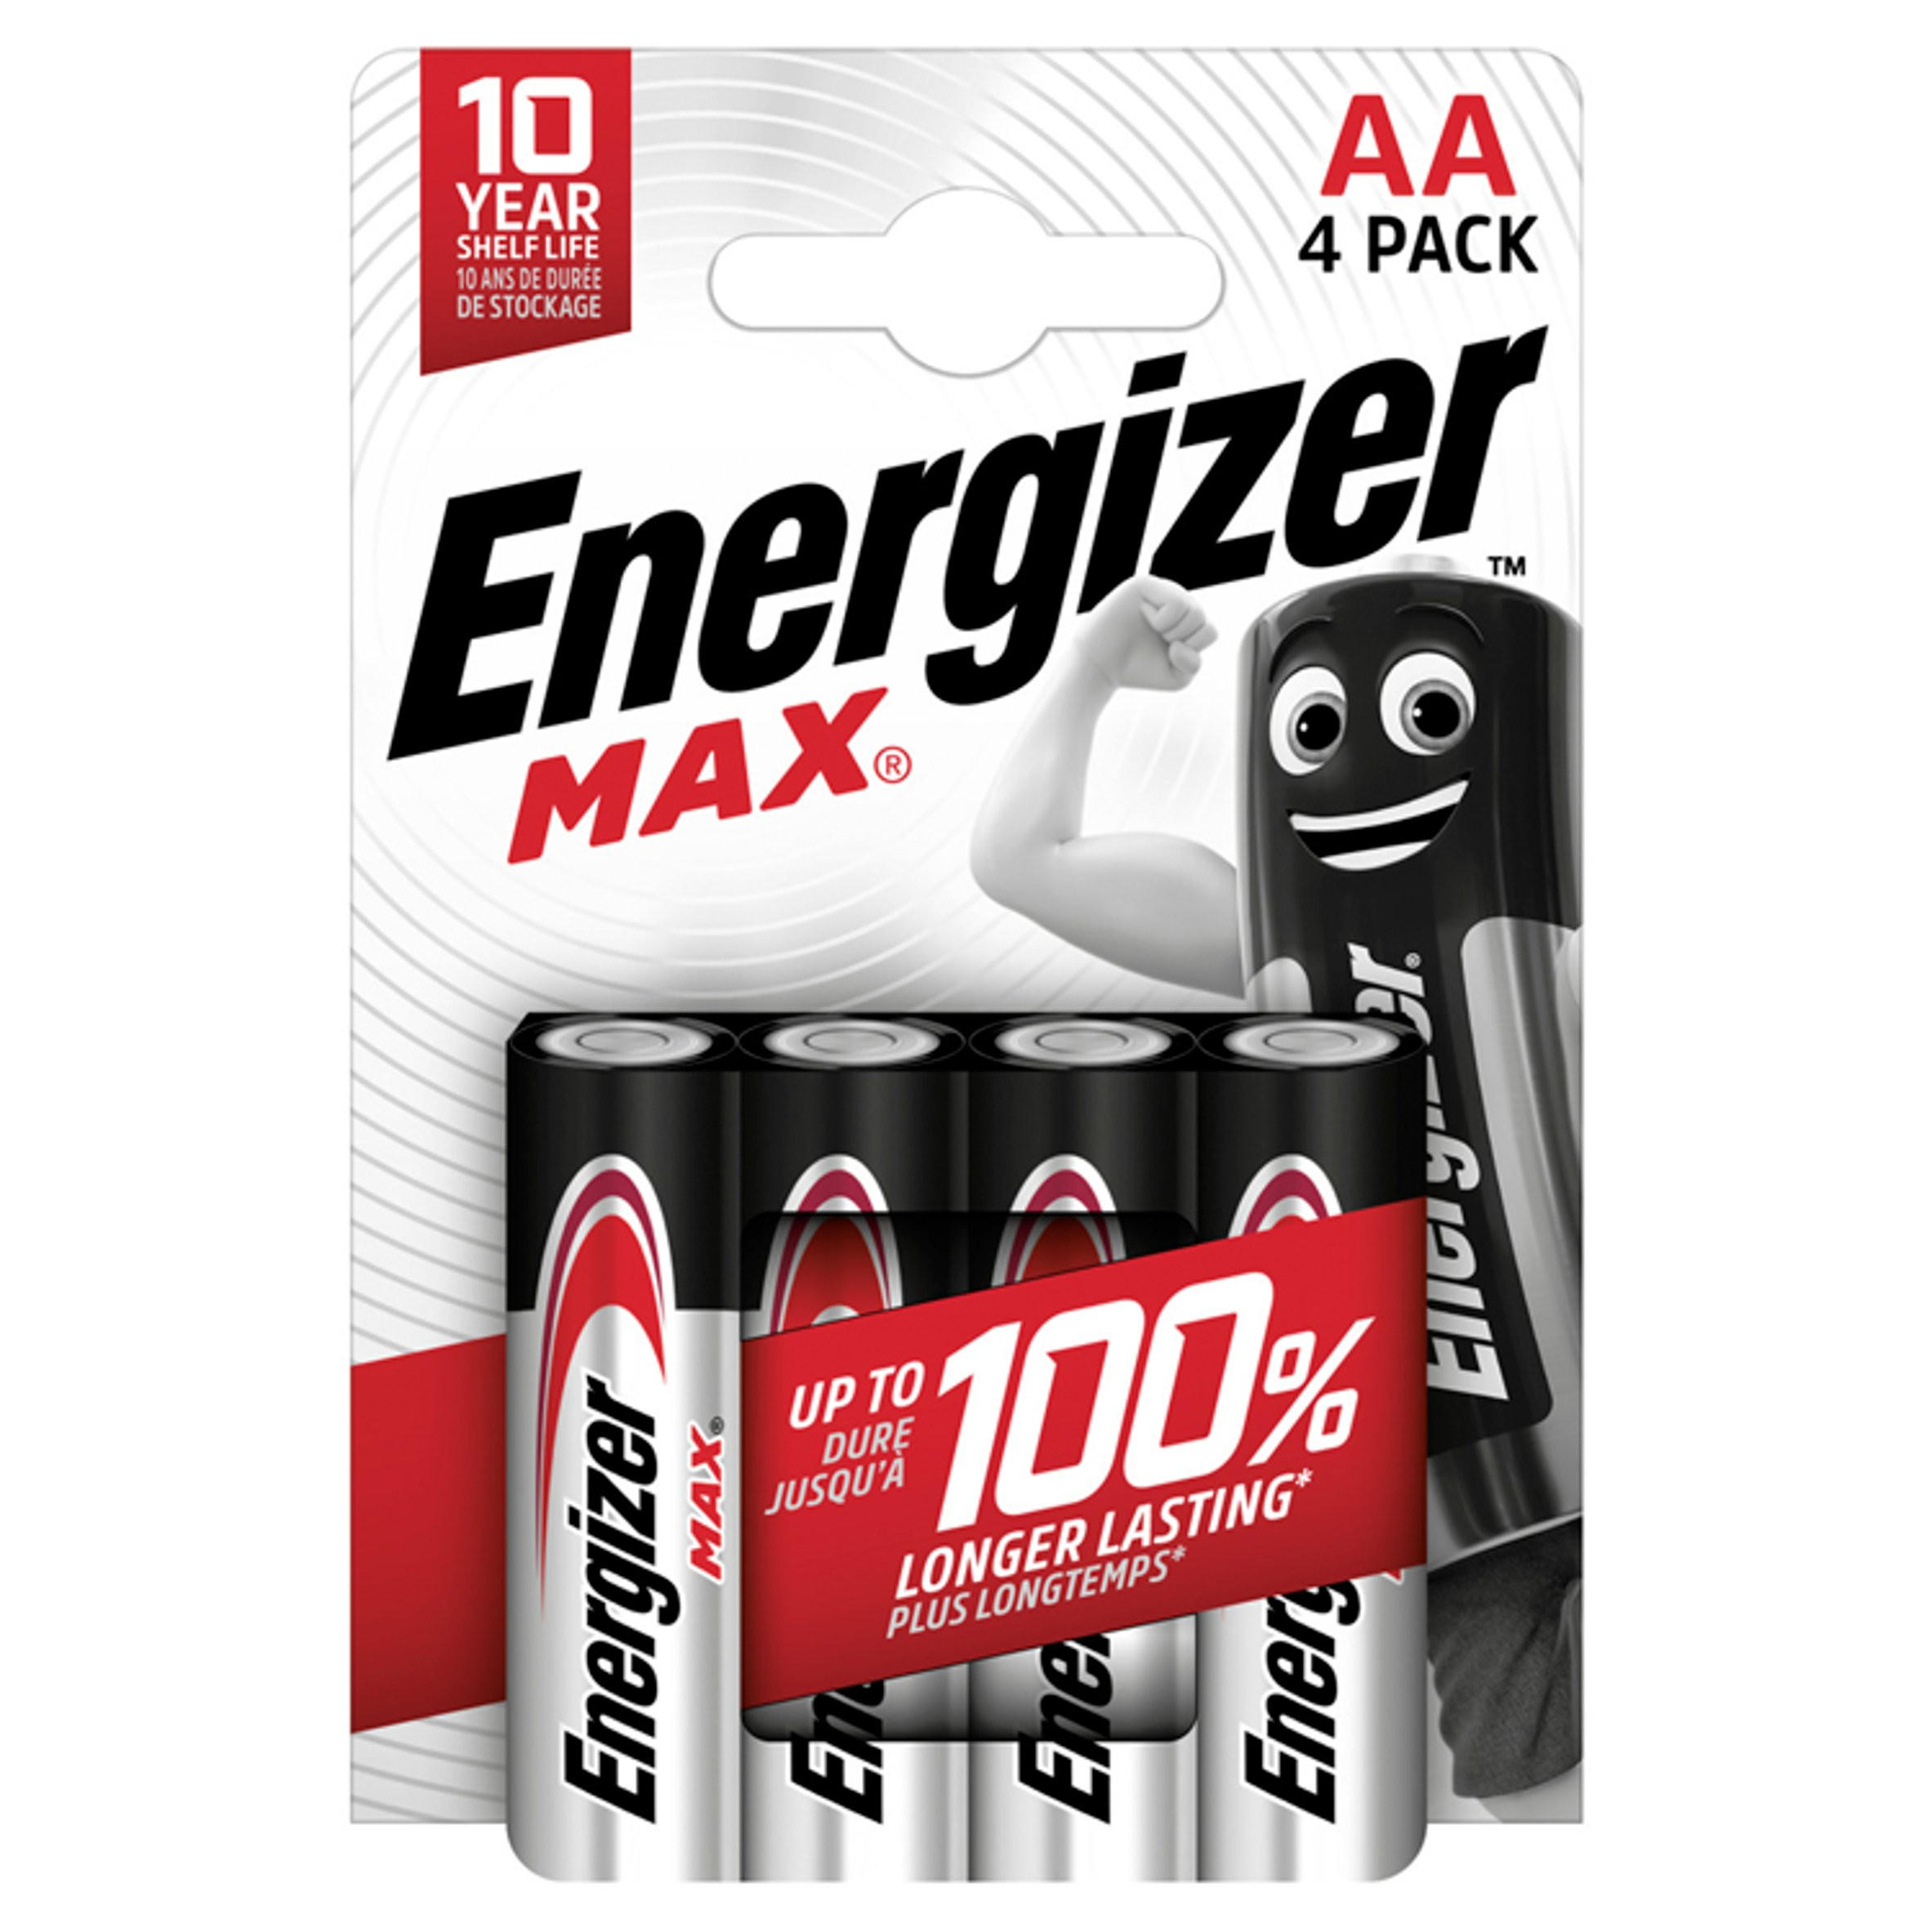 Energizer Max Aa Batteries Alkaline 4 Pack Home Accessories